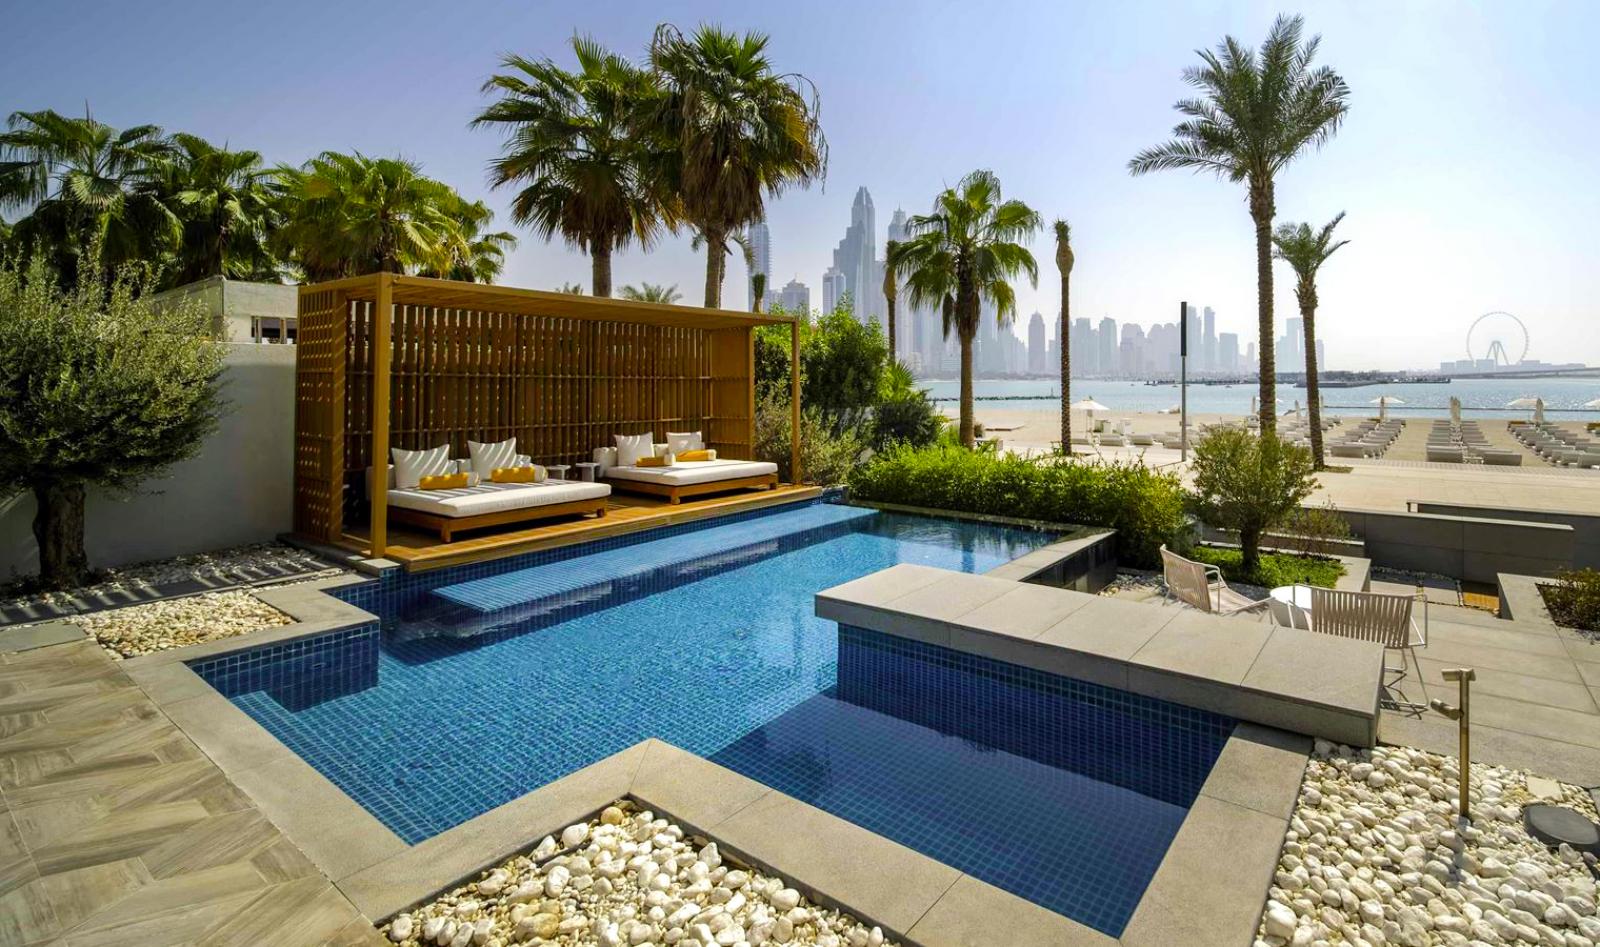 11 Best Hotels with Private Pools in Dubai - Updated 2022!